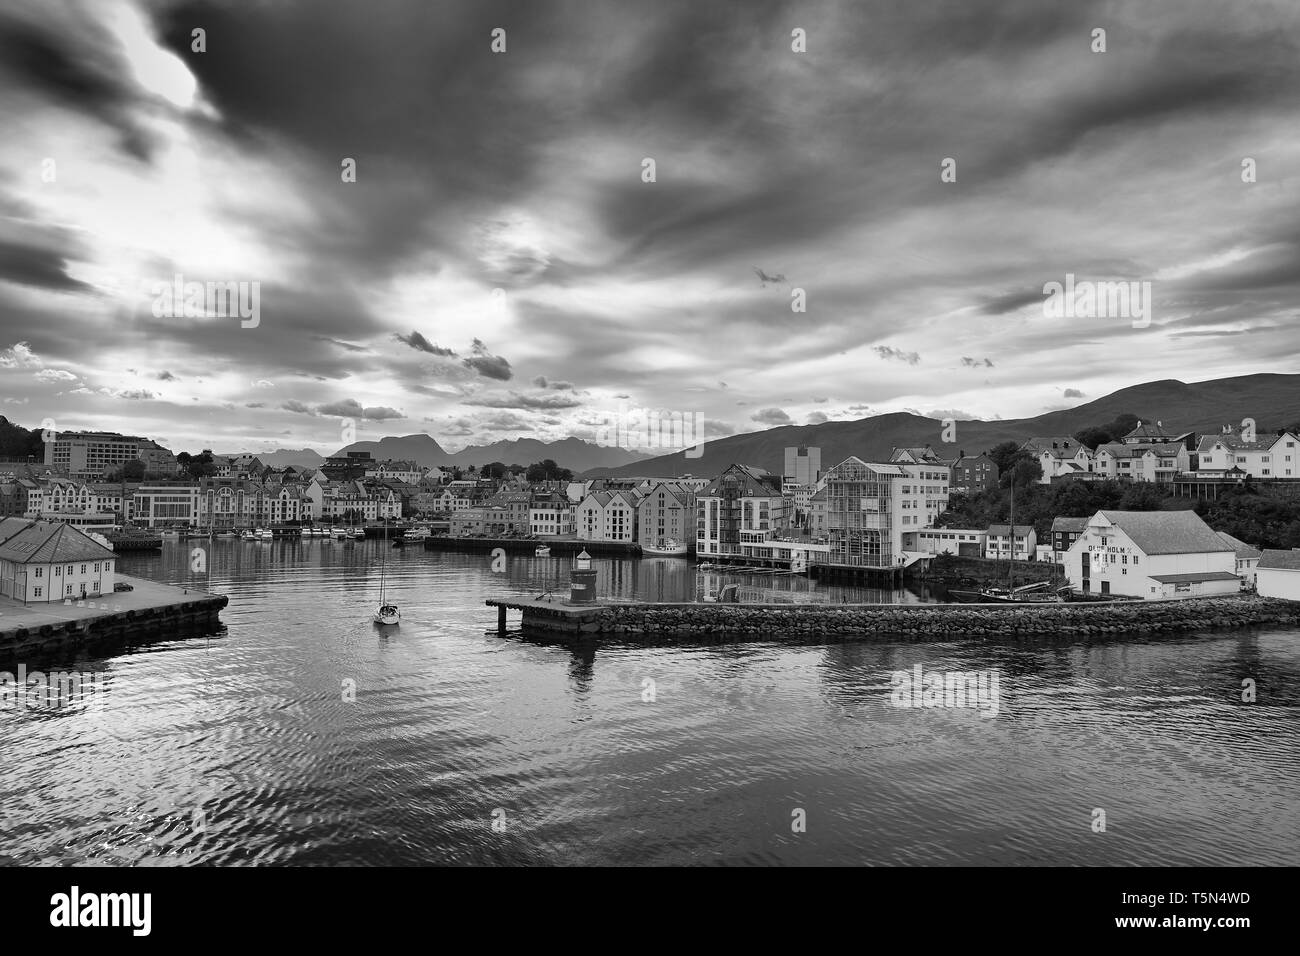 Moody Black And White Photo Of A Small Sailing Boat Entering The Picturesque Harbour In Ålesund, Møre og Romsdal, Norway. Stock Photo